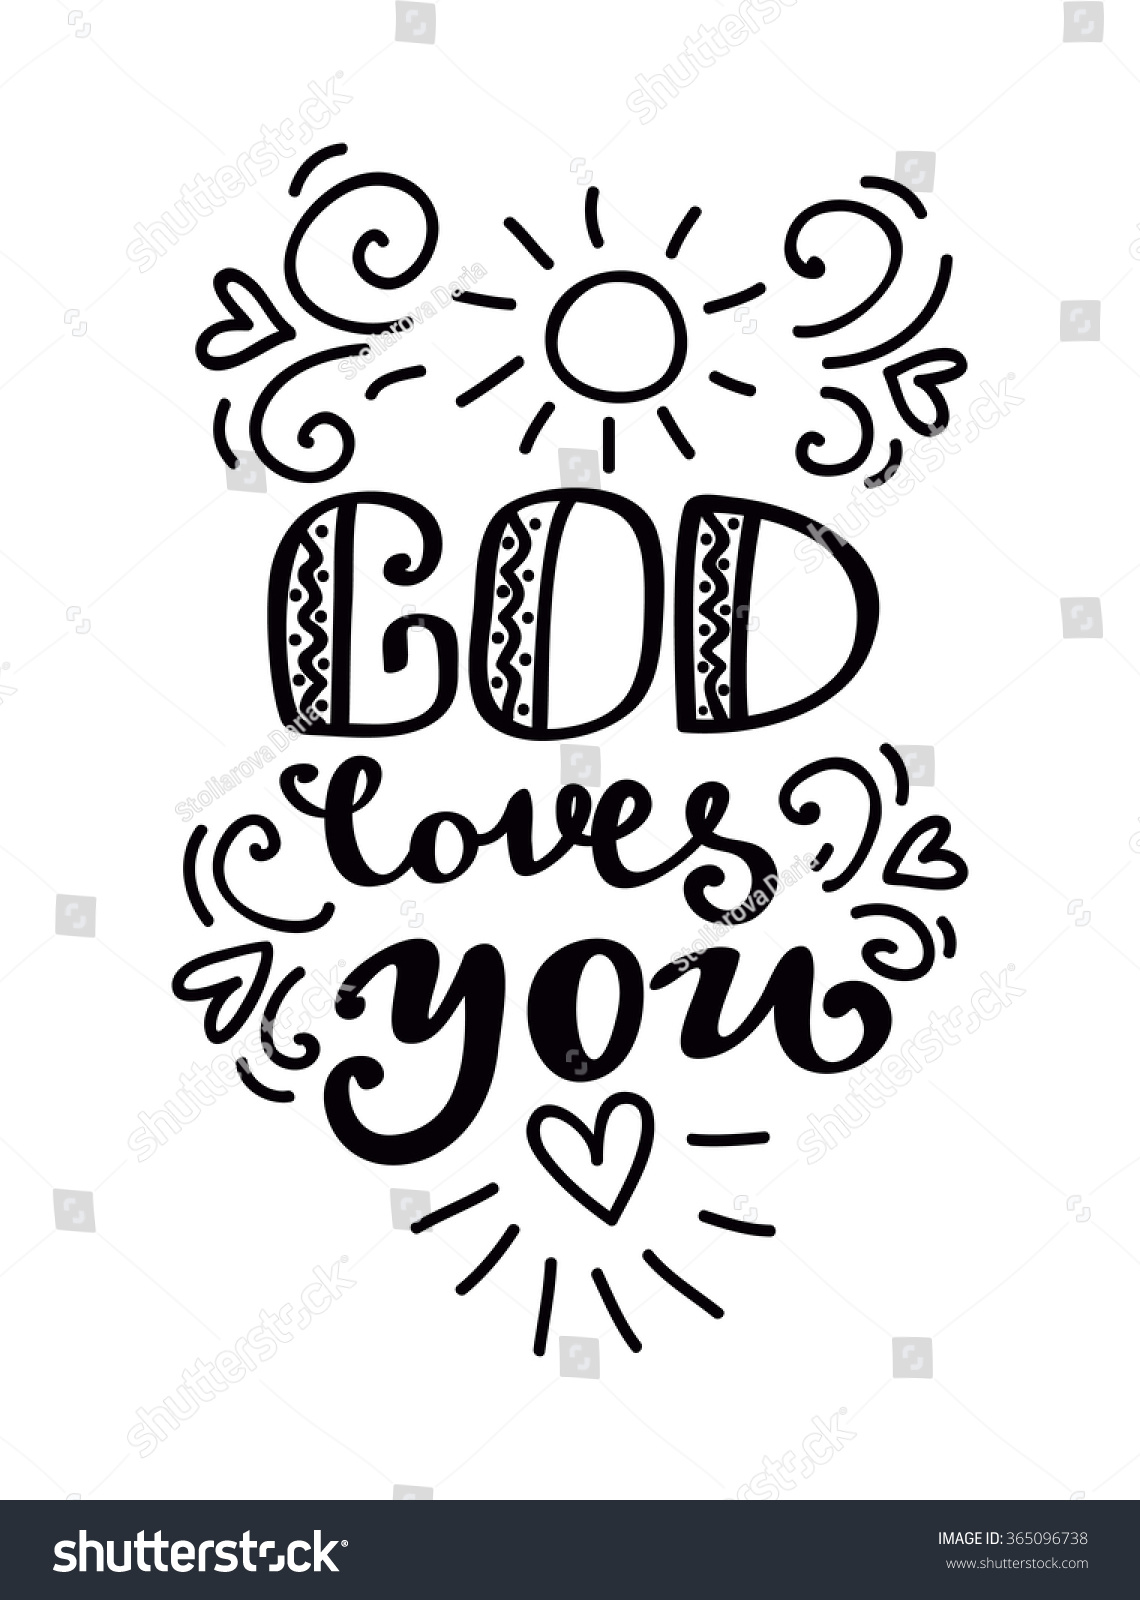 God loves you Typography poster Vector quote for God